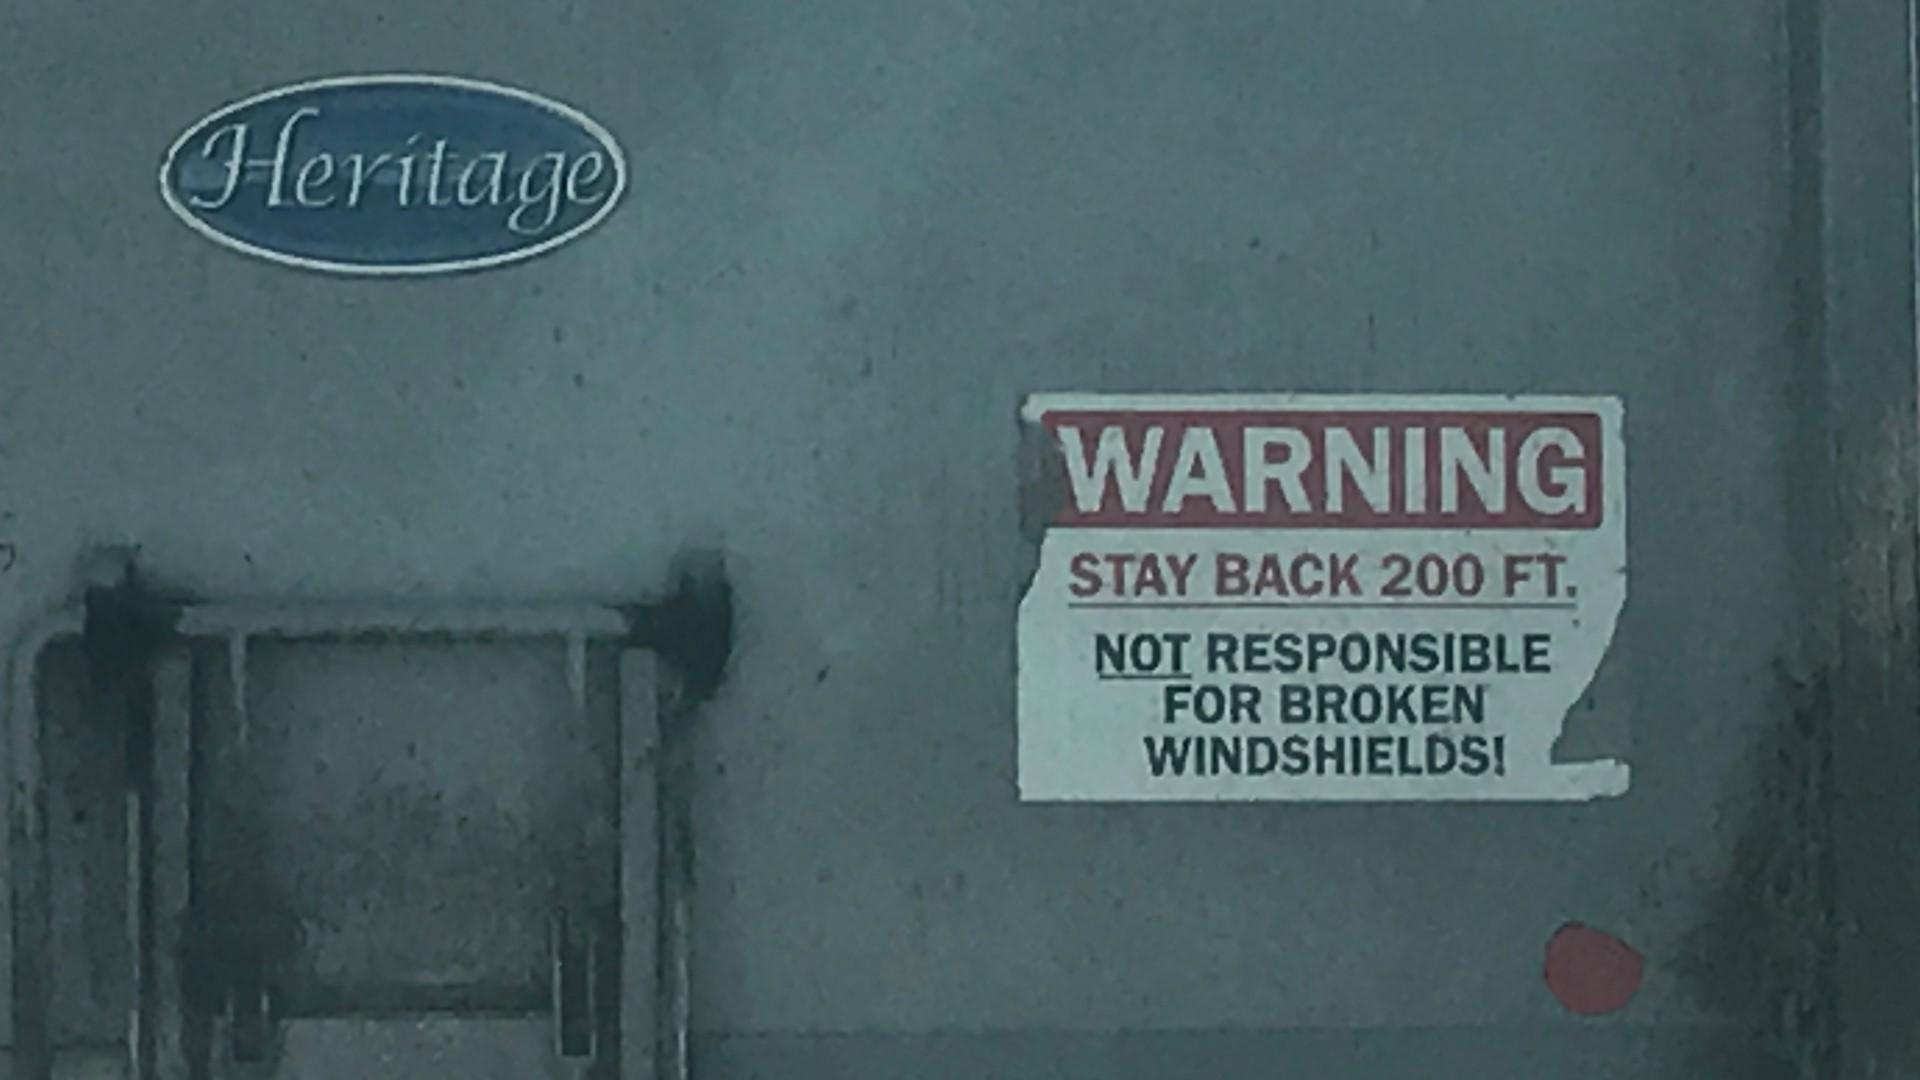 One of our photographers saw this sign on the back of dump truck in D.C. and sent it to the Verify team for a closer look.